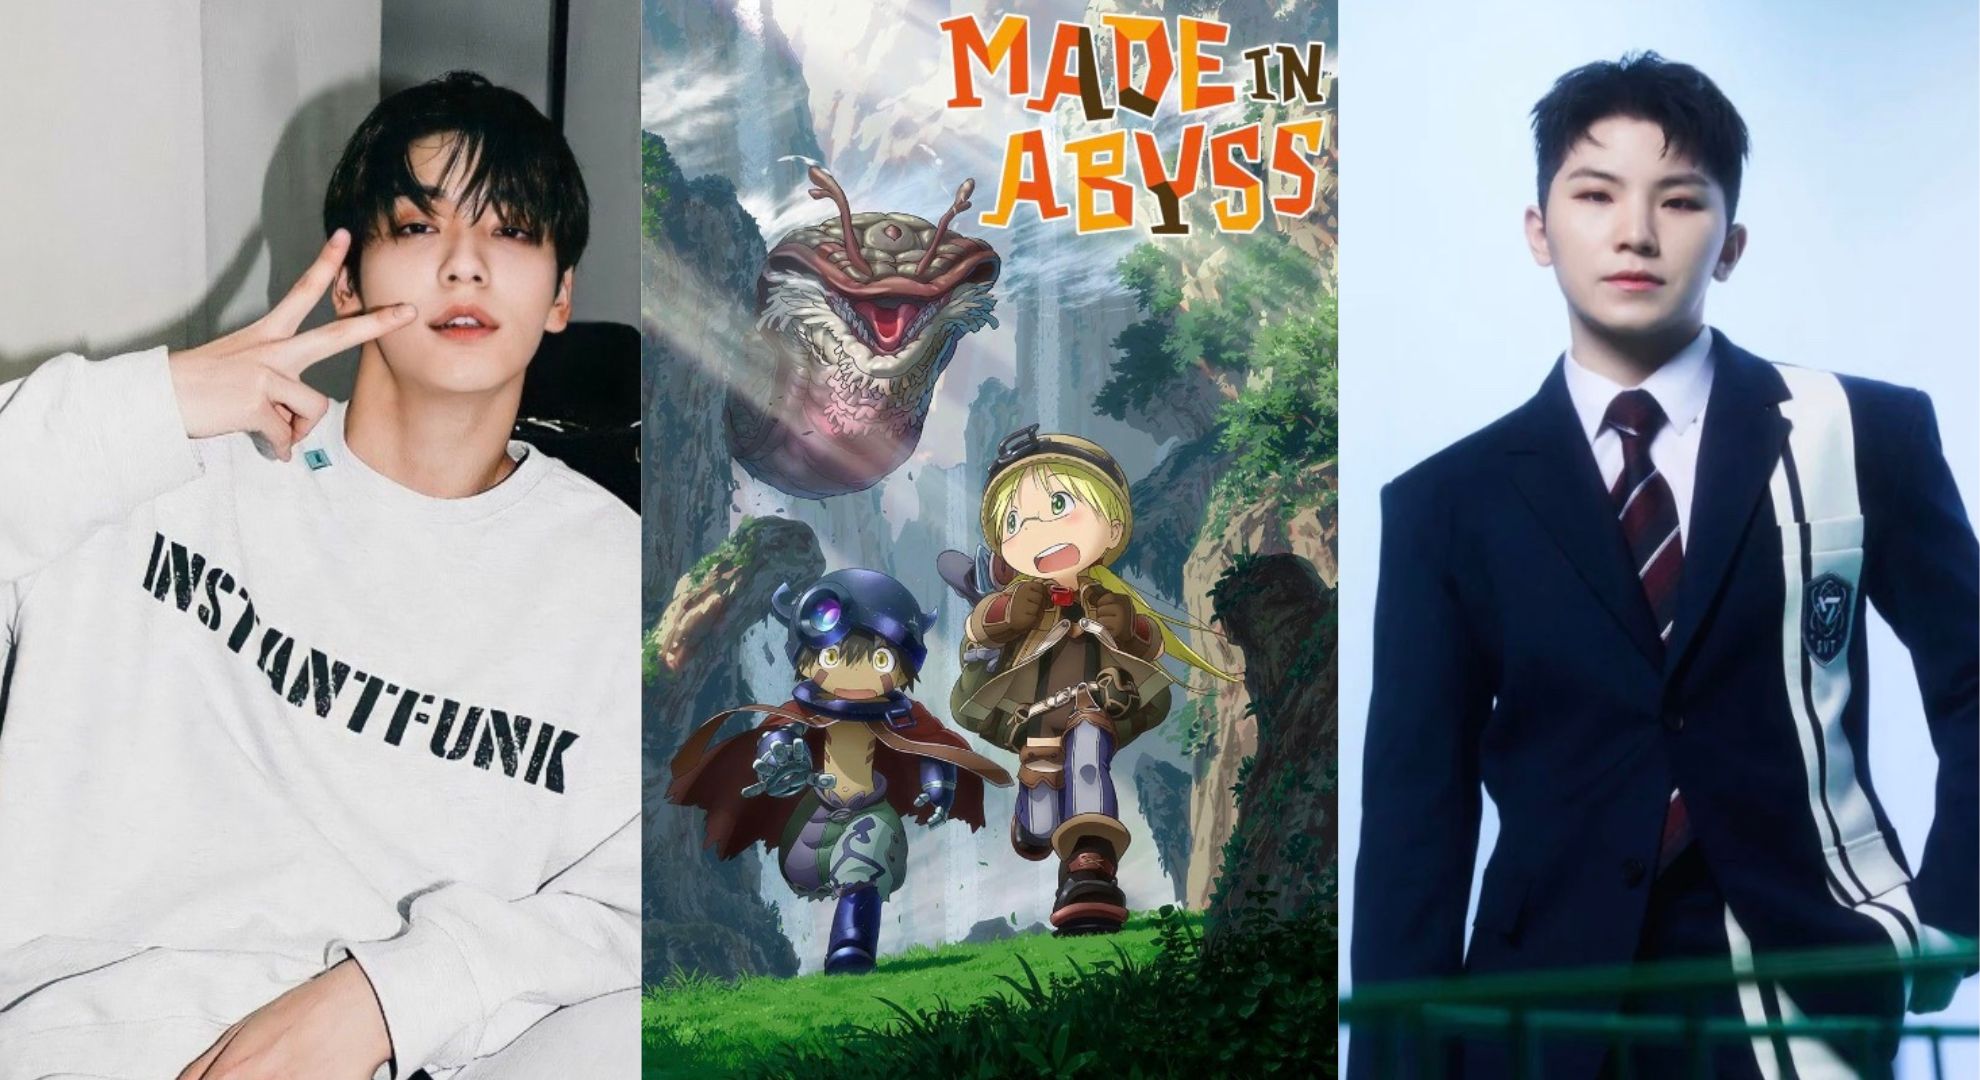 K-Pop fans try cancelling singer Woozi for watching Made in Abyss